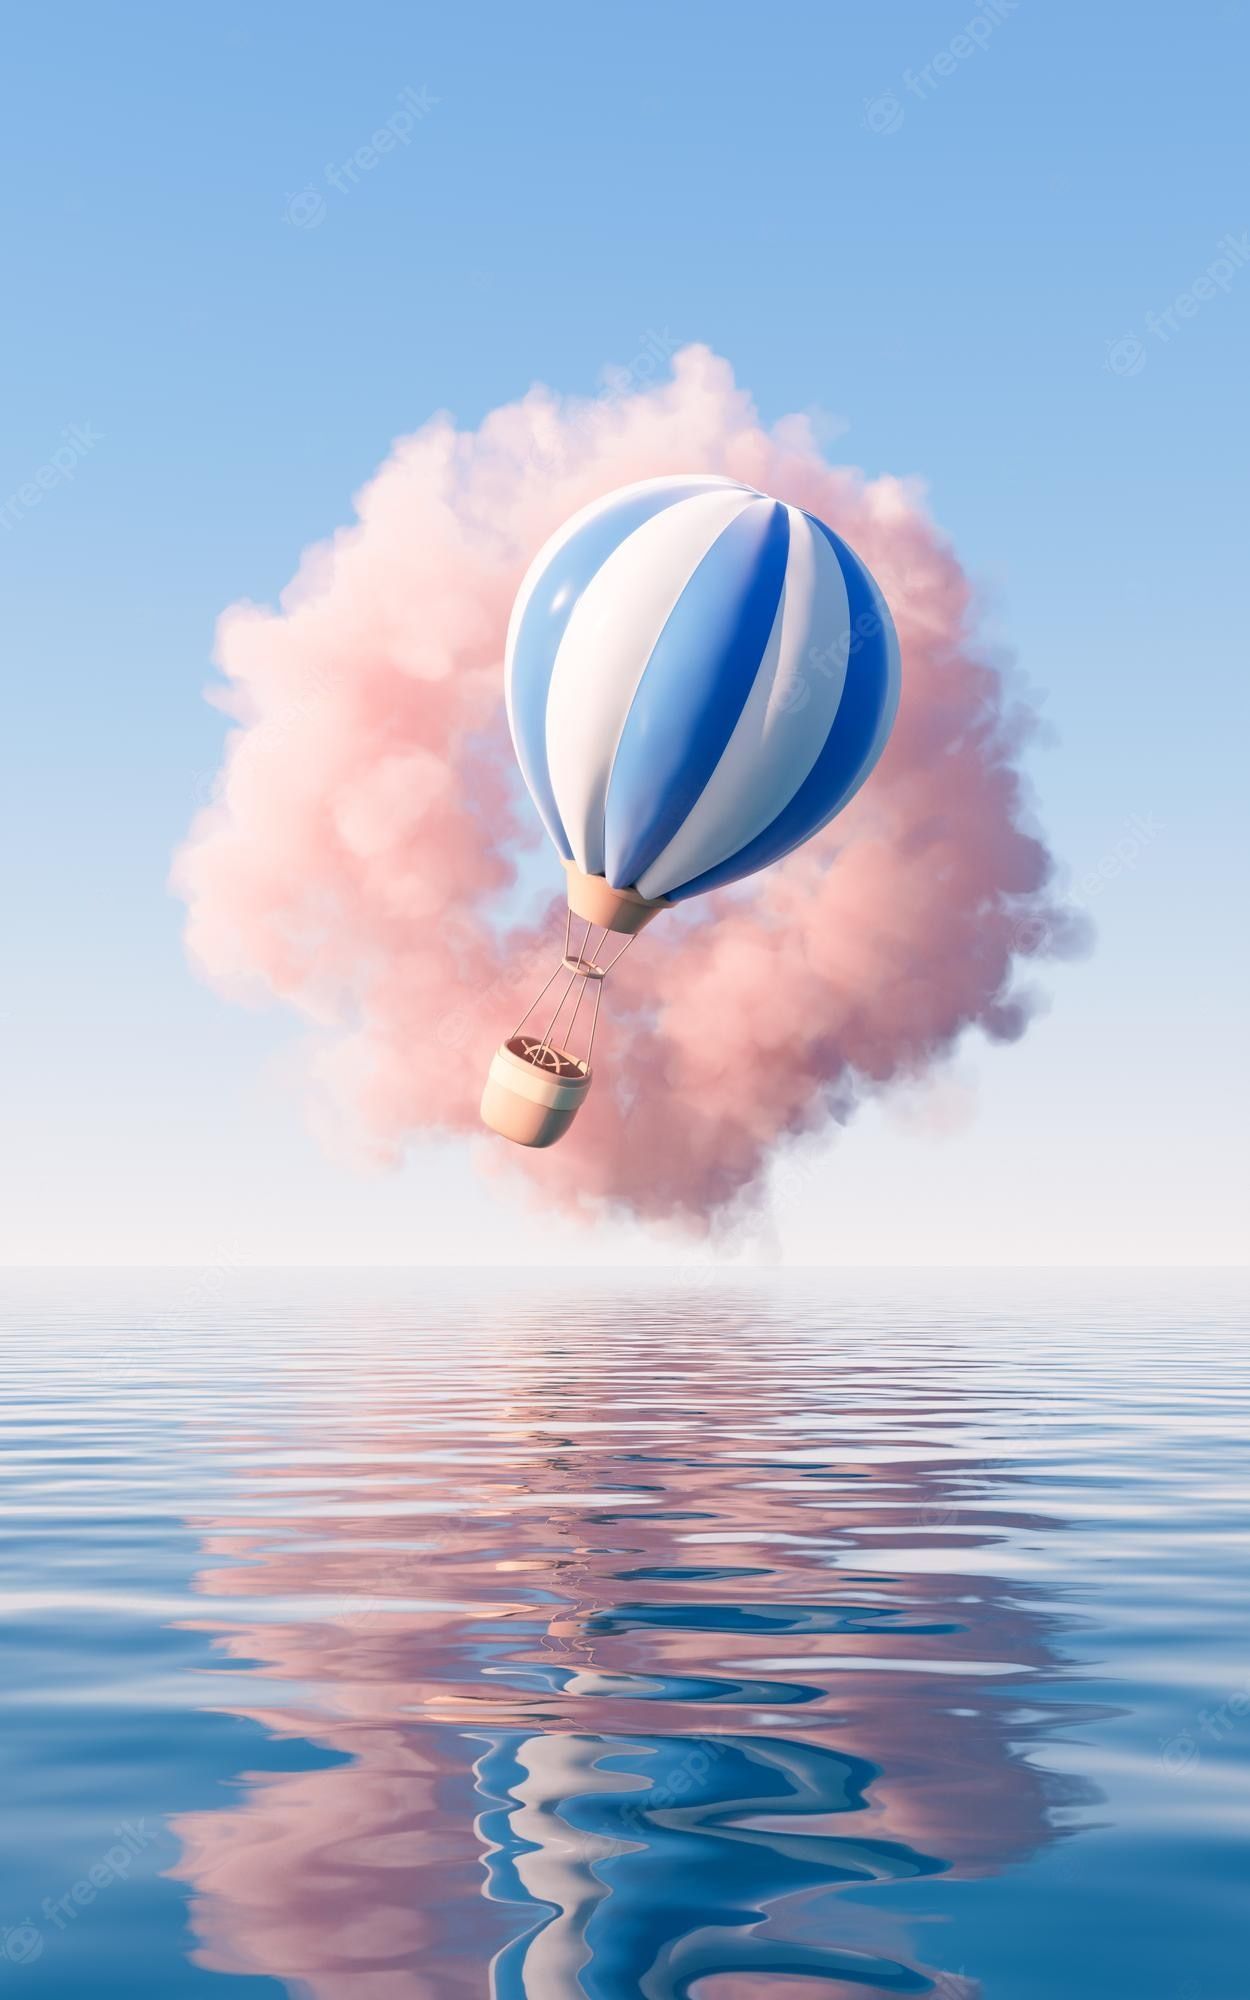 Premium Photo. Hot air balloon with cartoon style 3D rendering